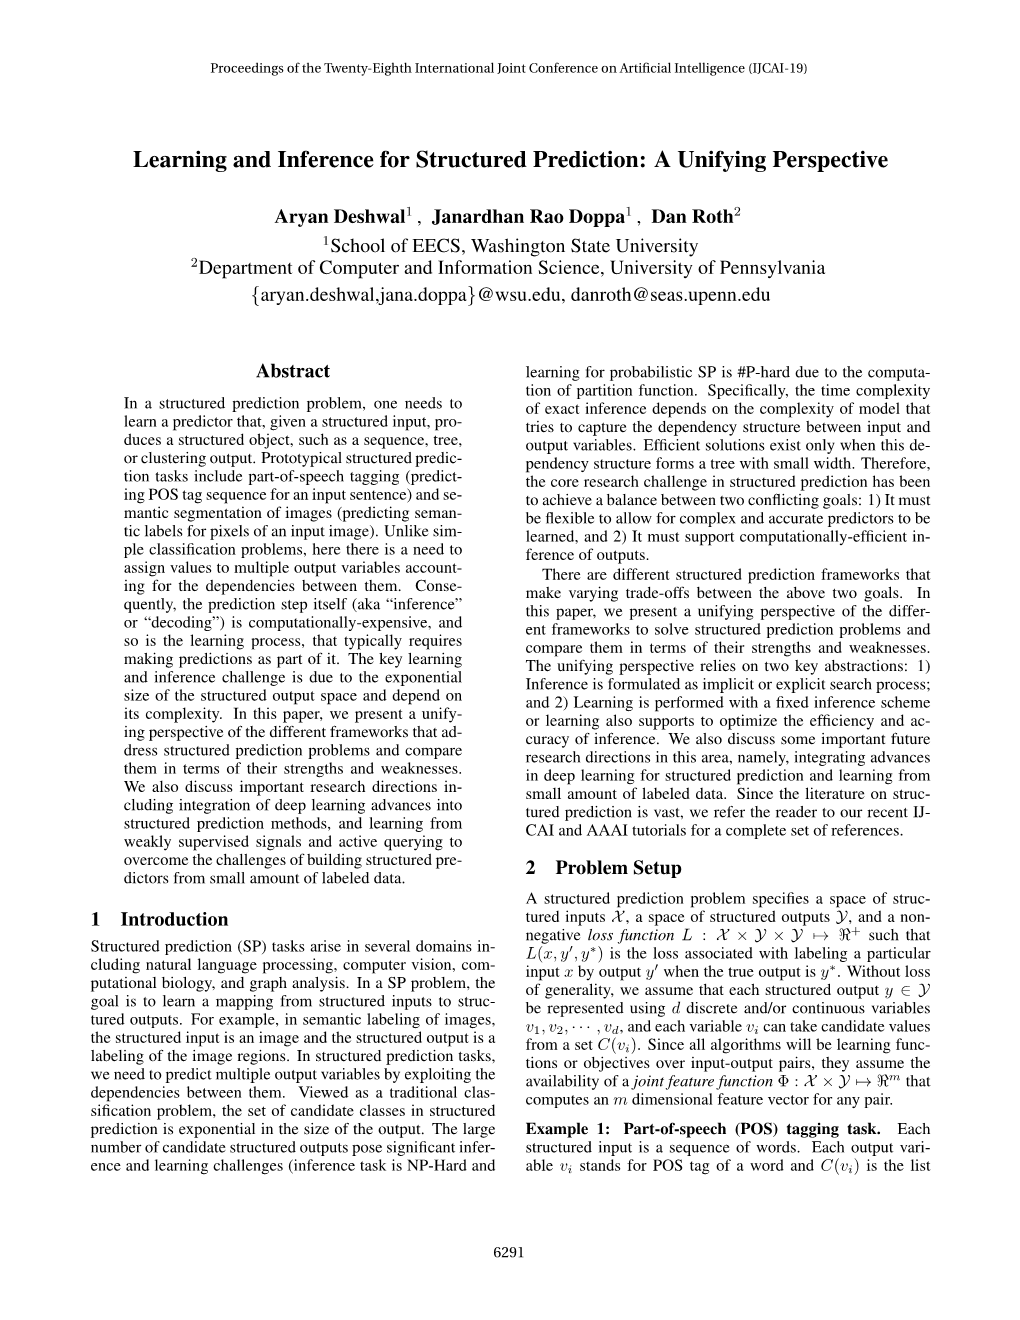 Learning and Inference for Structured Prediction: a Unifying Perspective